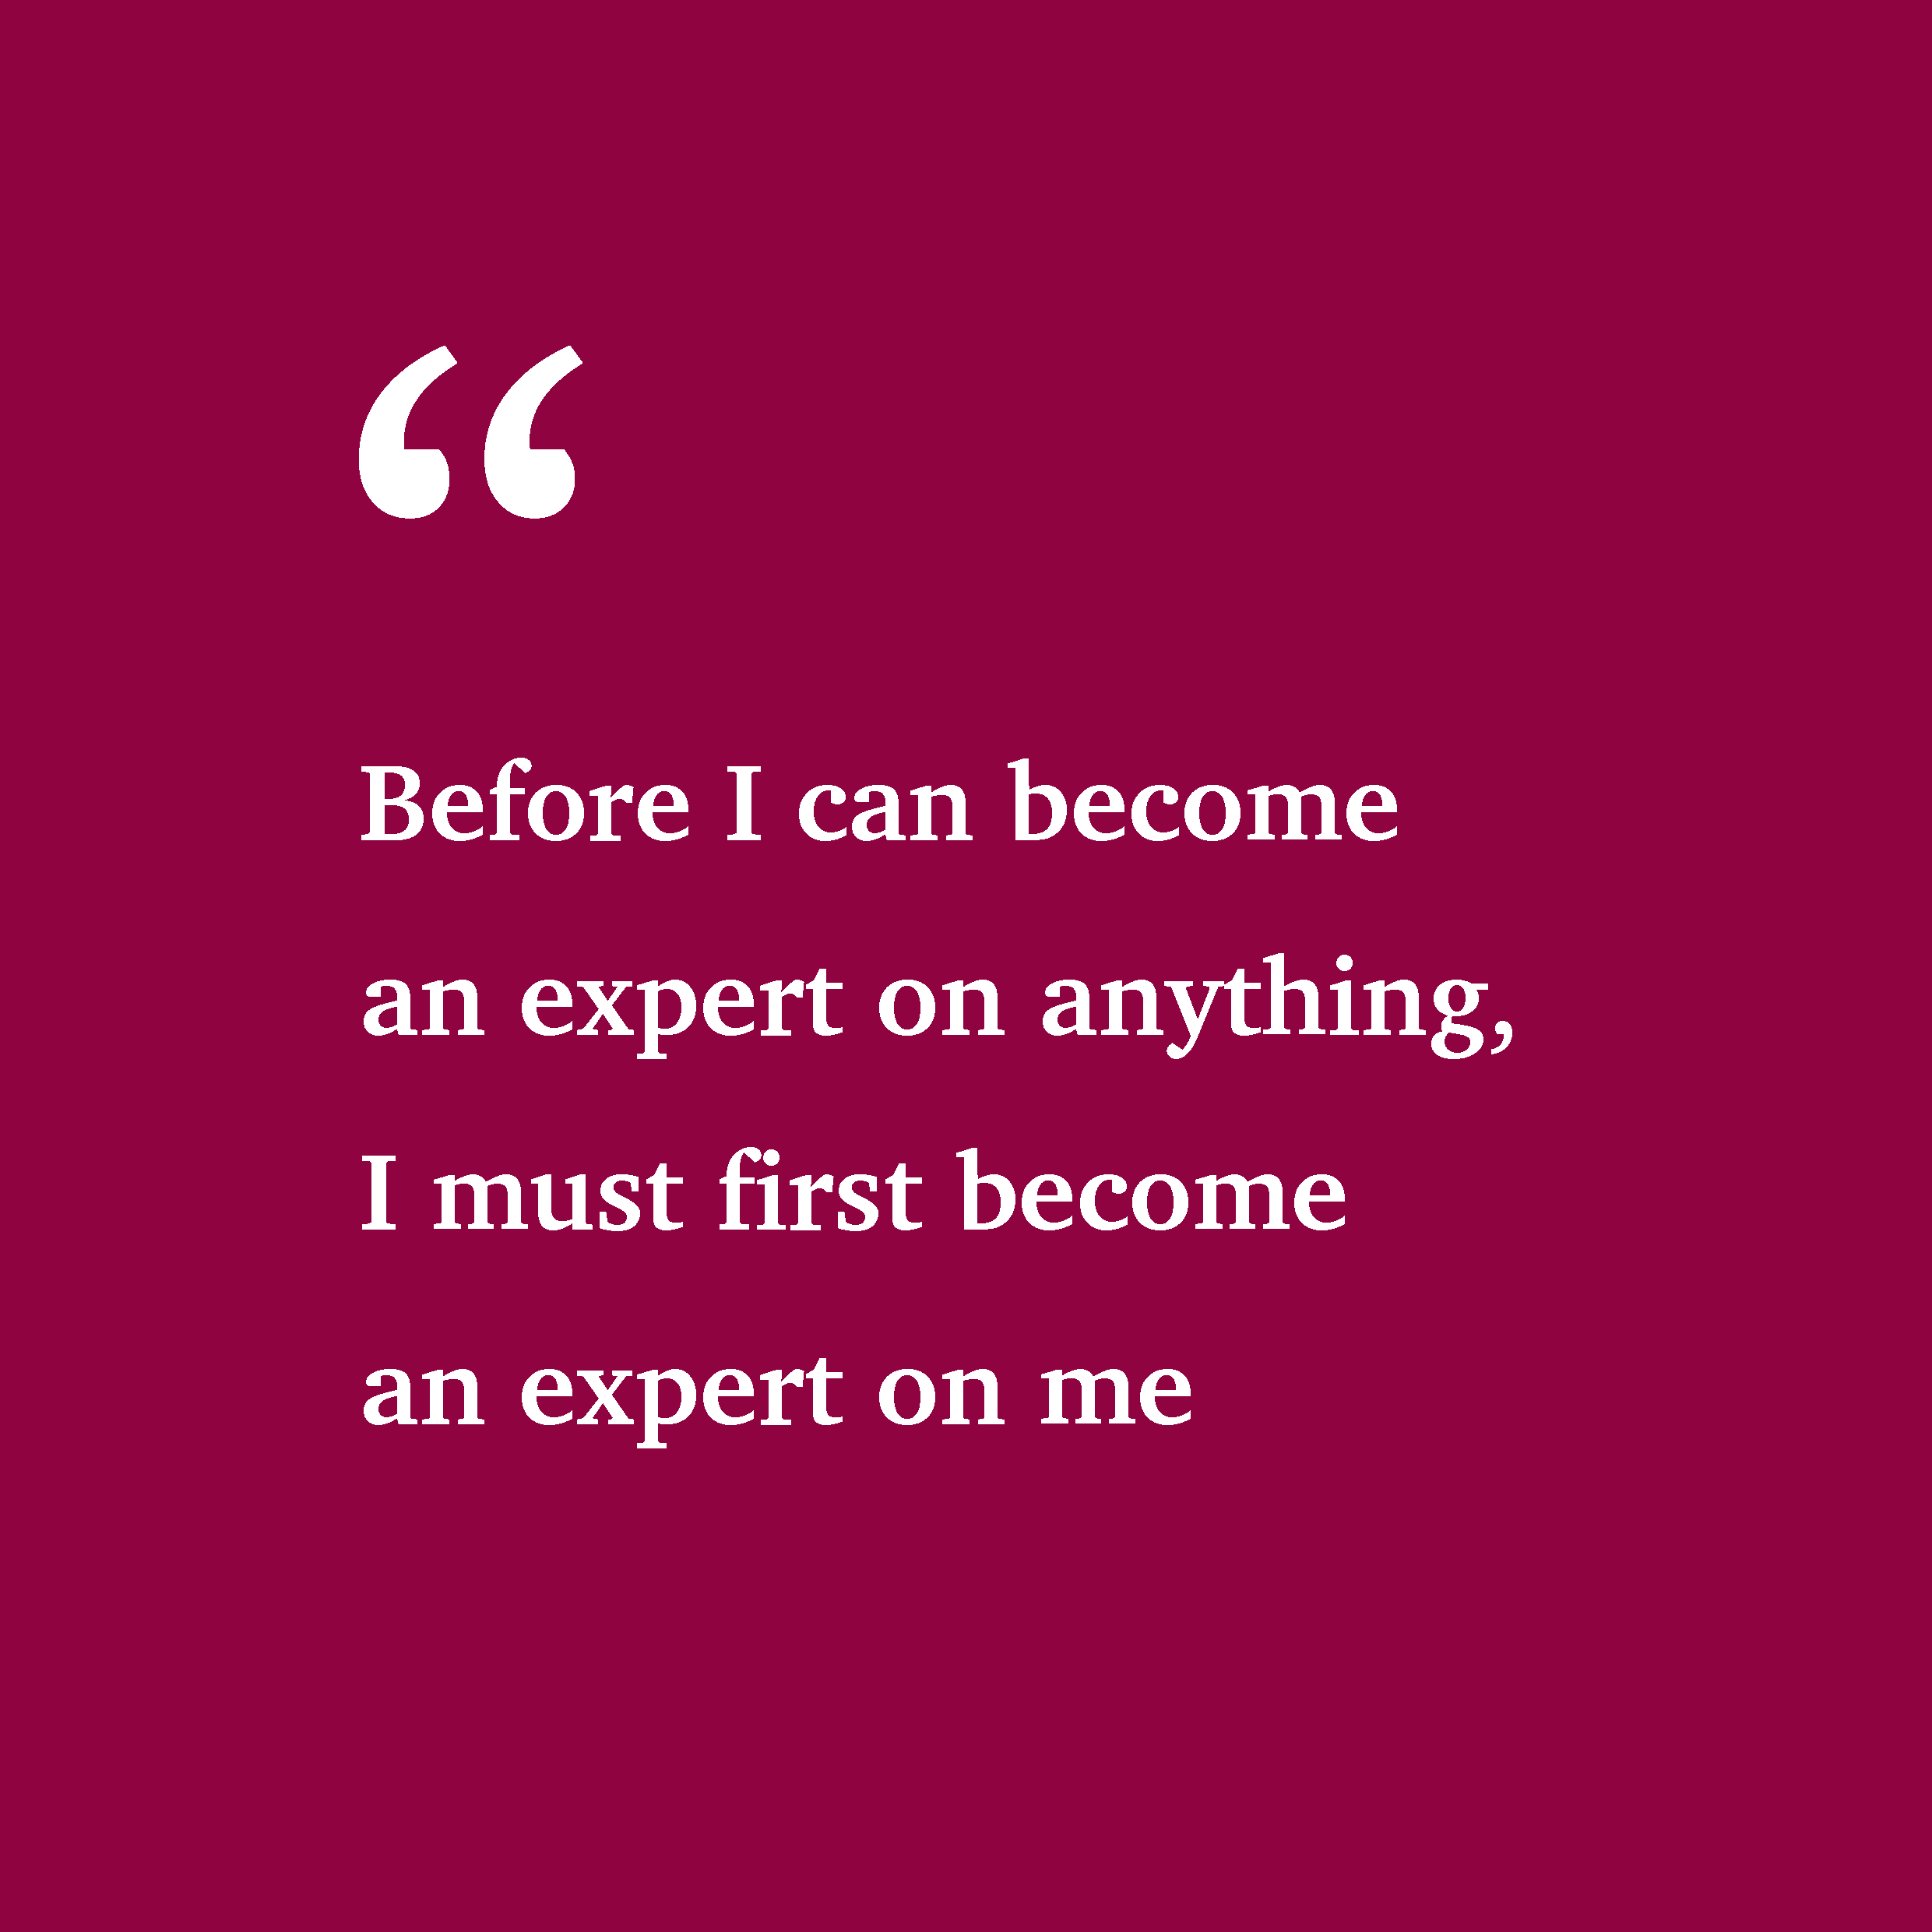 Before I can become an expert on anything, I must first become an expert on me